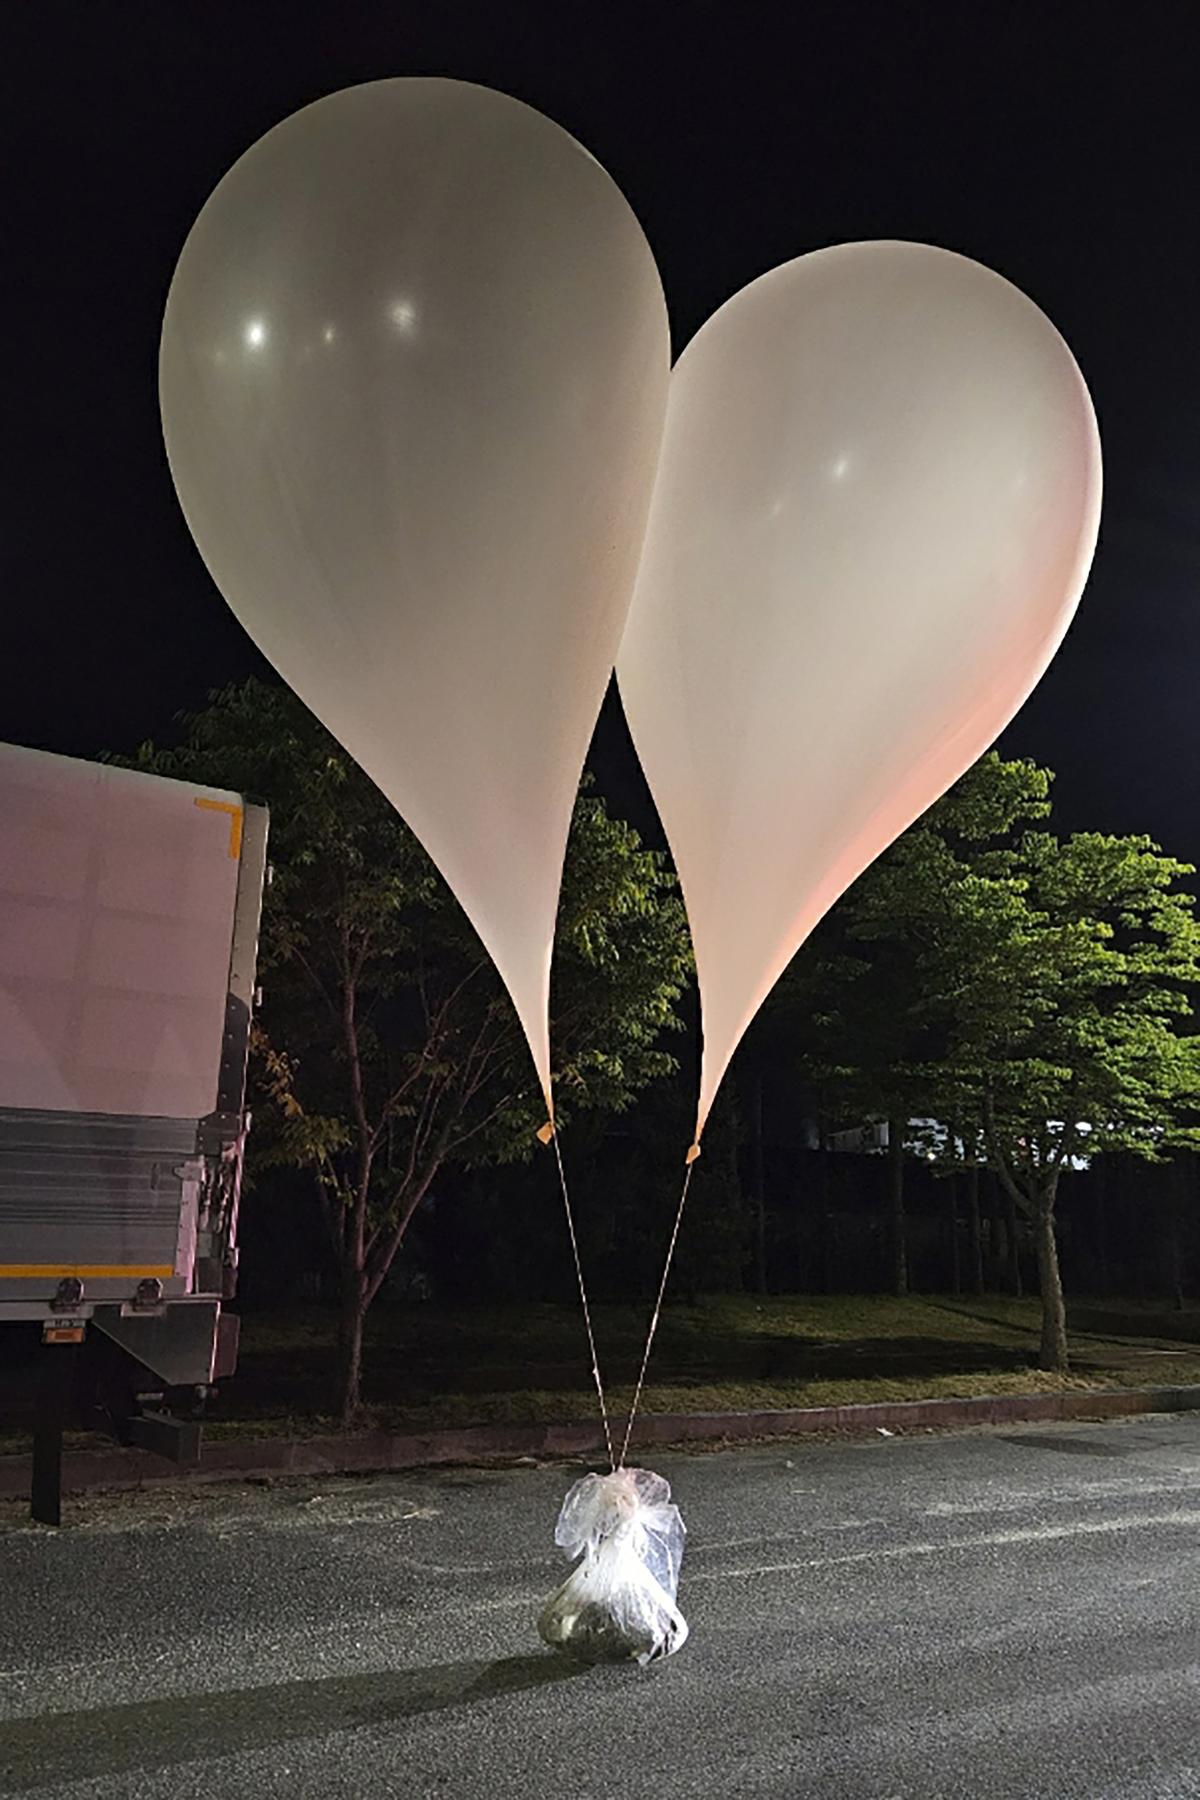 FILE - This photo provided by South Korea Defense Ministry, shows balloons with trash presumably sent by North Korea, in South Chungcheong Province, South Korea, on May 29, 2024. South Korea has recently retaliated for North Korea's trash-carrying balloon launches with propaganda loudspeaker broadcasts at border areas. The South Korean broadcasts reportedly included K-pop sensation BTS’s mega hits like “Butter” and “Dynamite,” weather forecasts and news on Samsung as well as outside criticism on the North’s missile program.(South Korea Defense Ministry via AP, File)